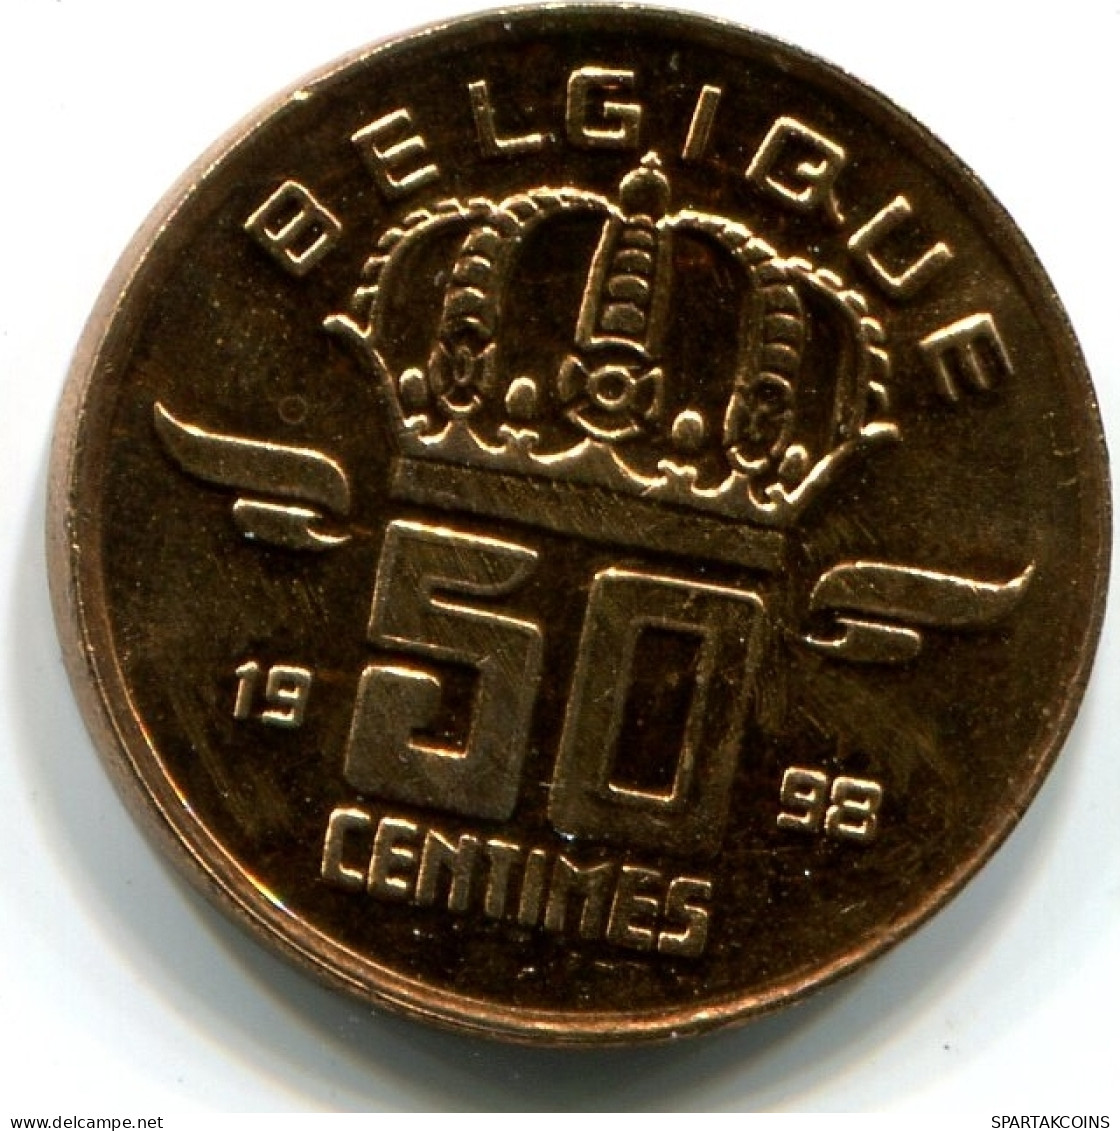 50 CENTIMES 1998 FRENCH Text BELGIUM Coin UNC #W10966.U - 50 Cent